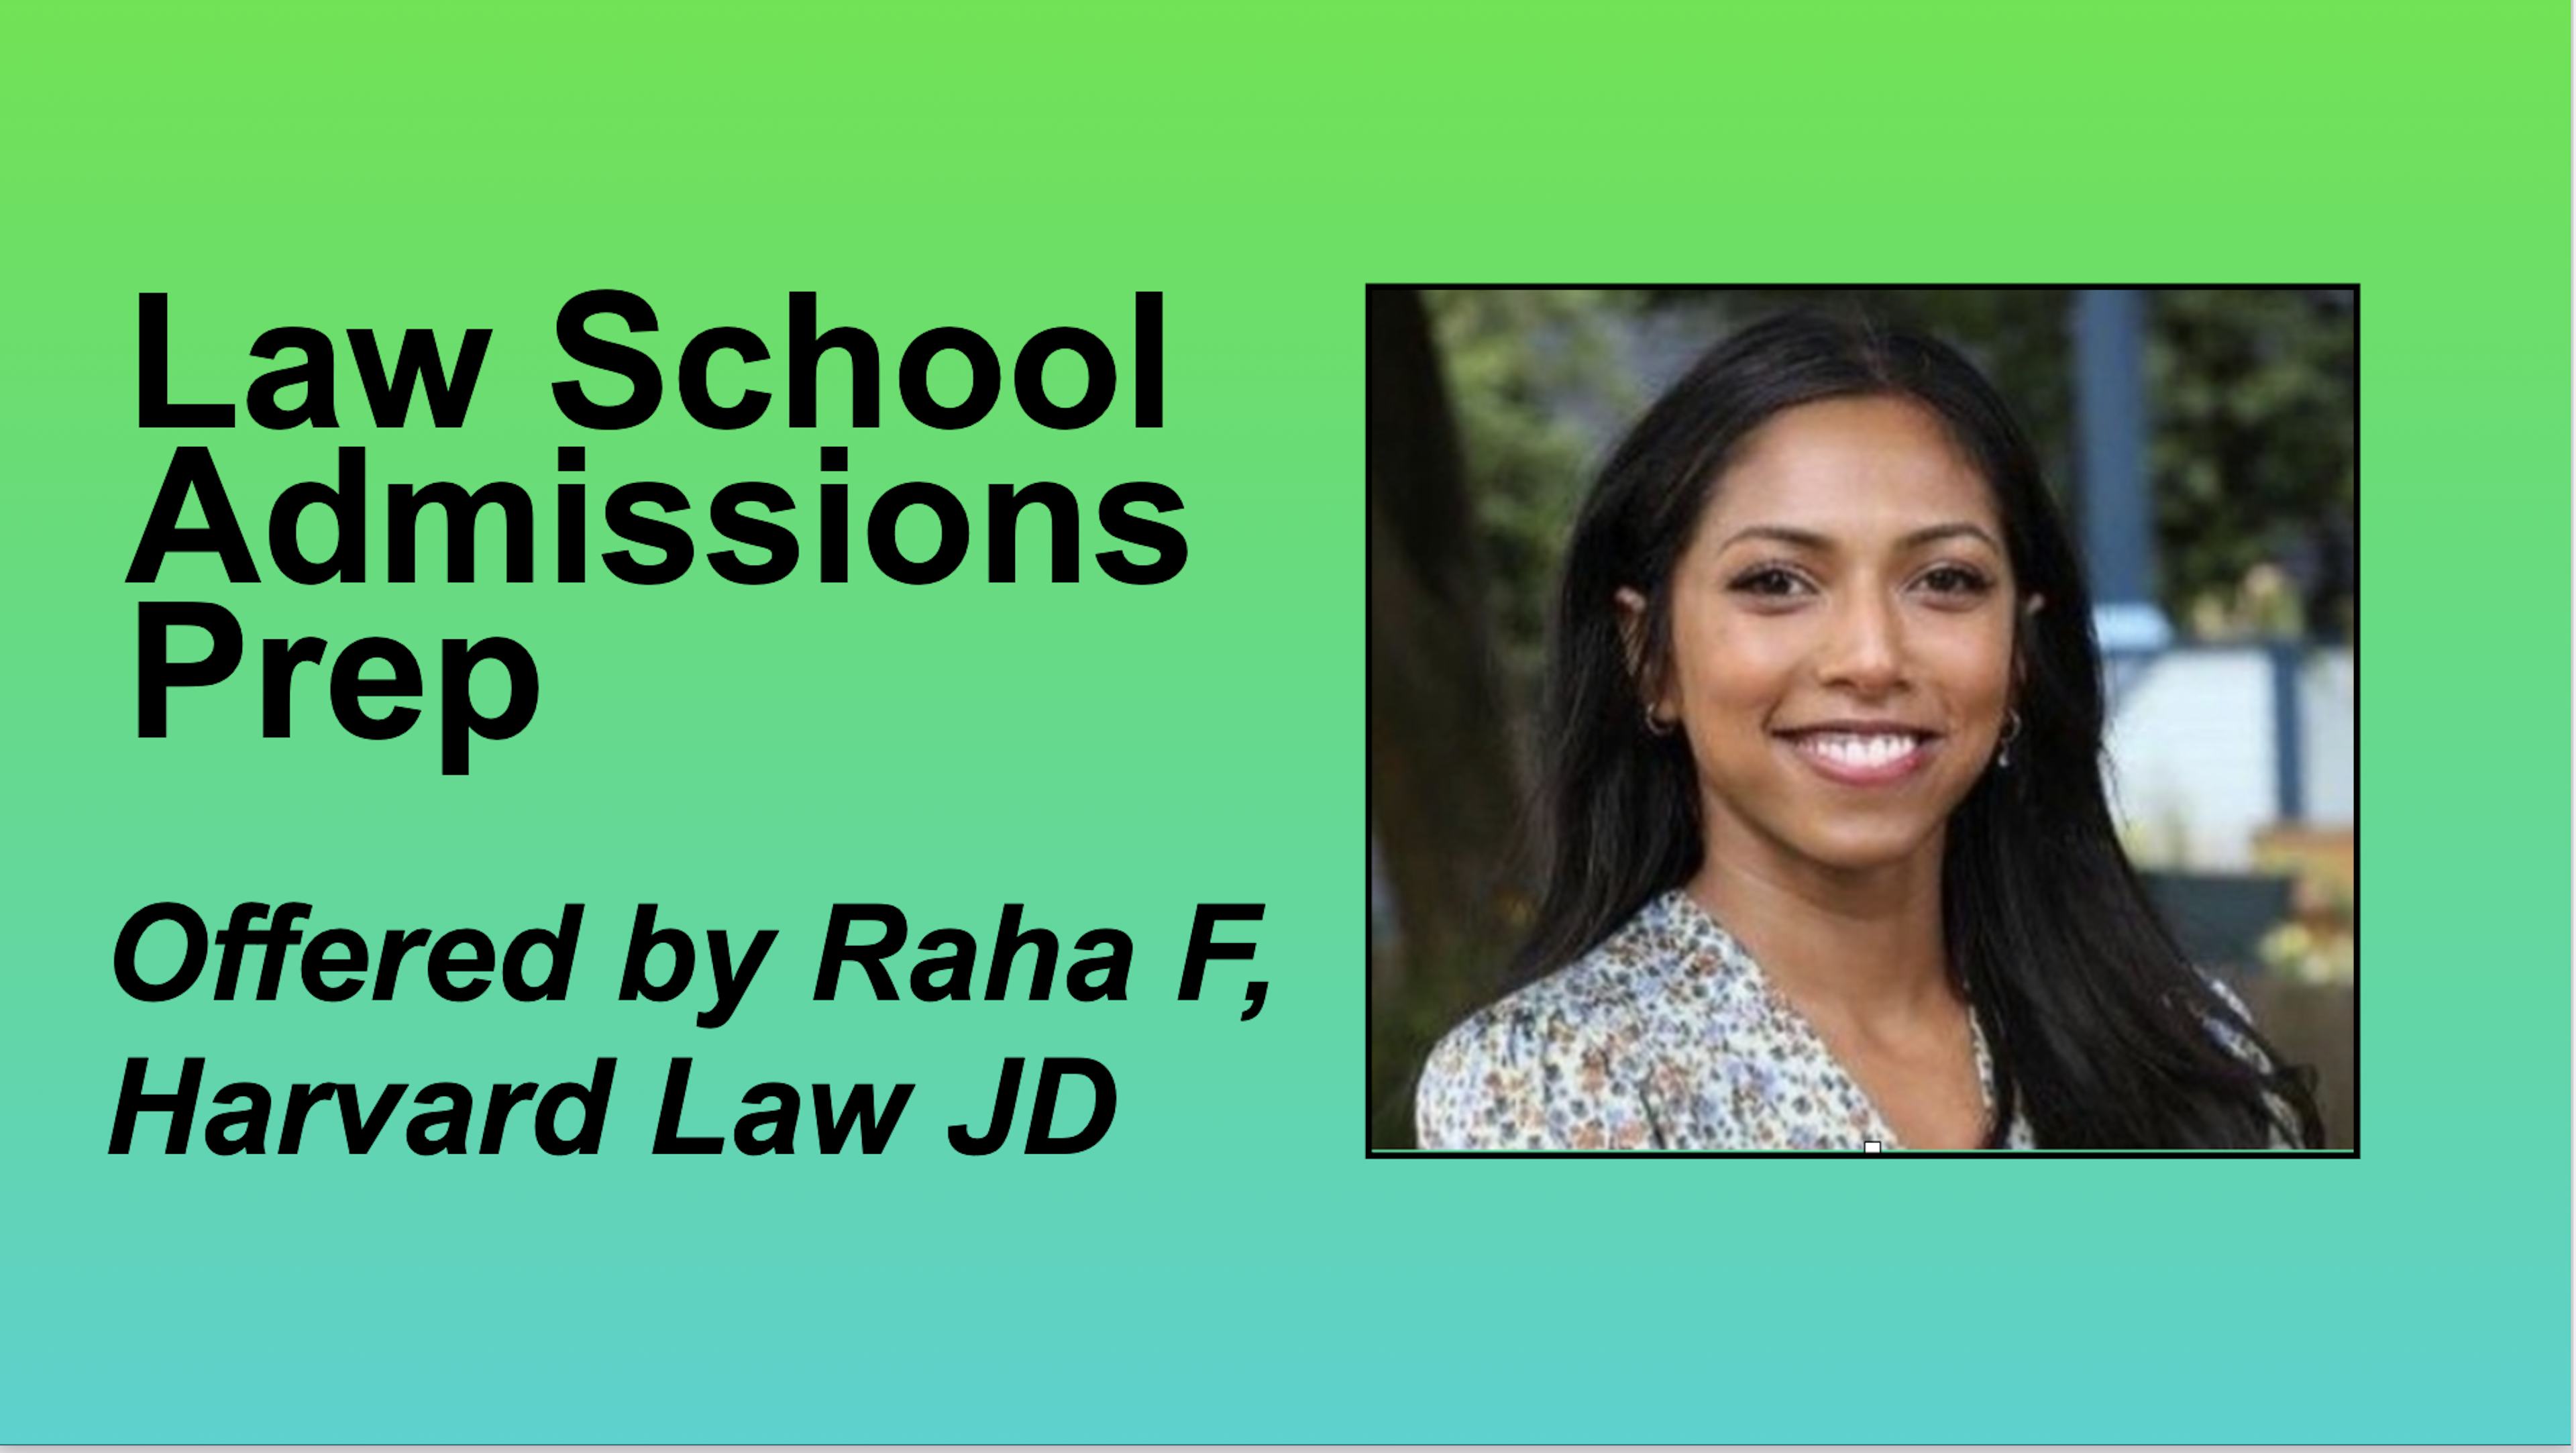 Law School Admissions Prep Package, from a Harvard JD